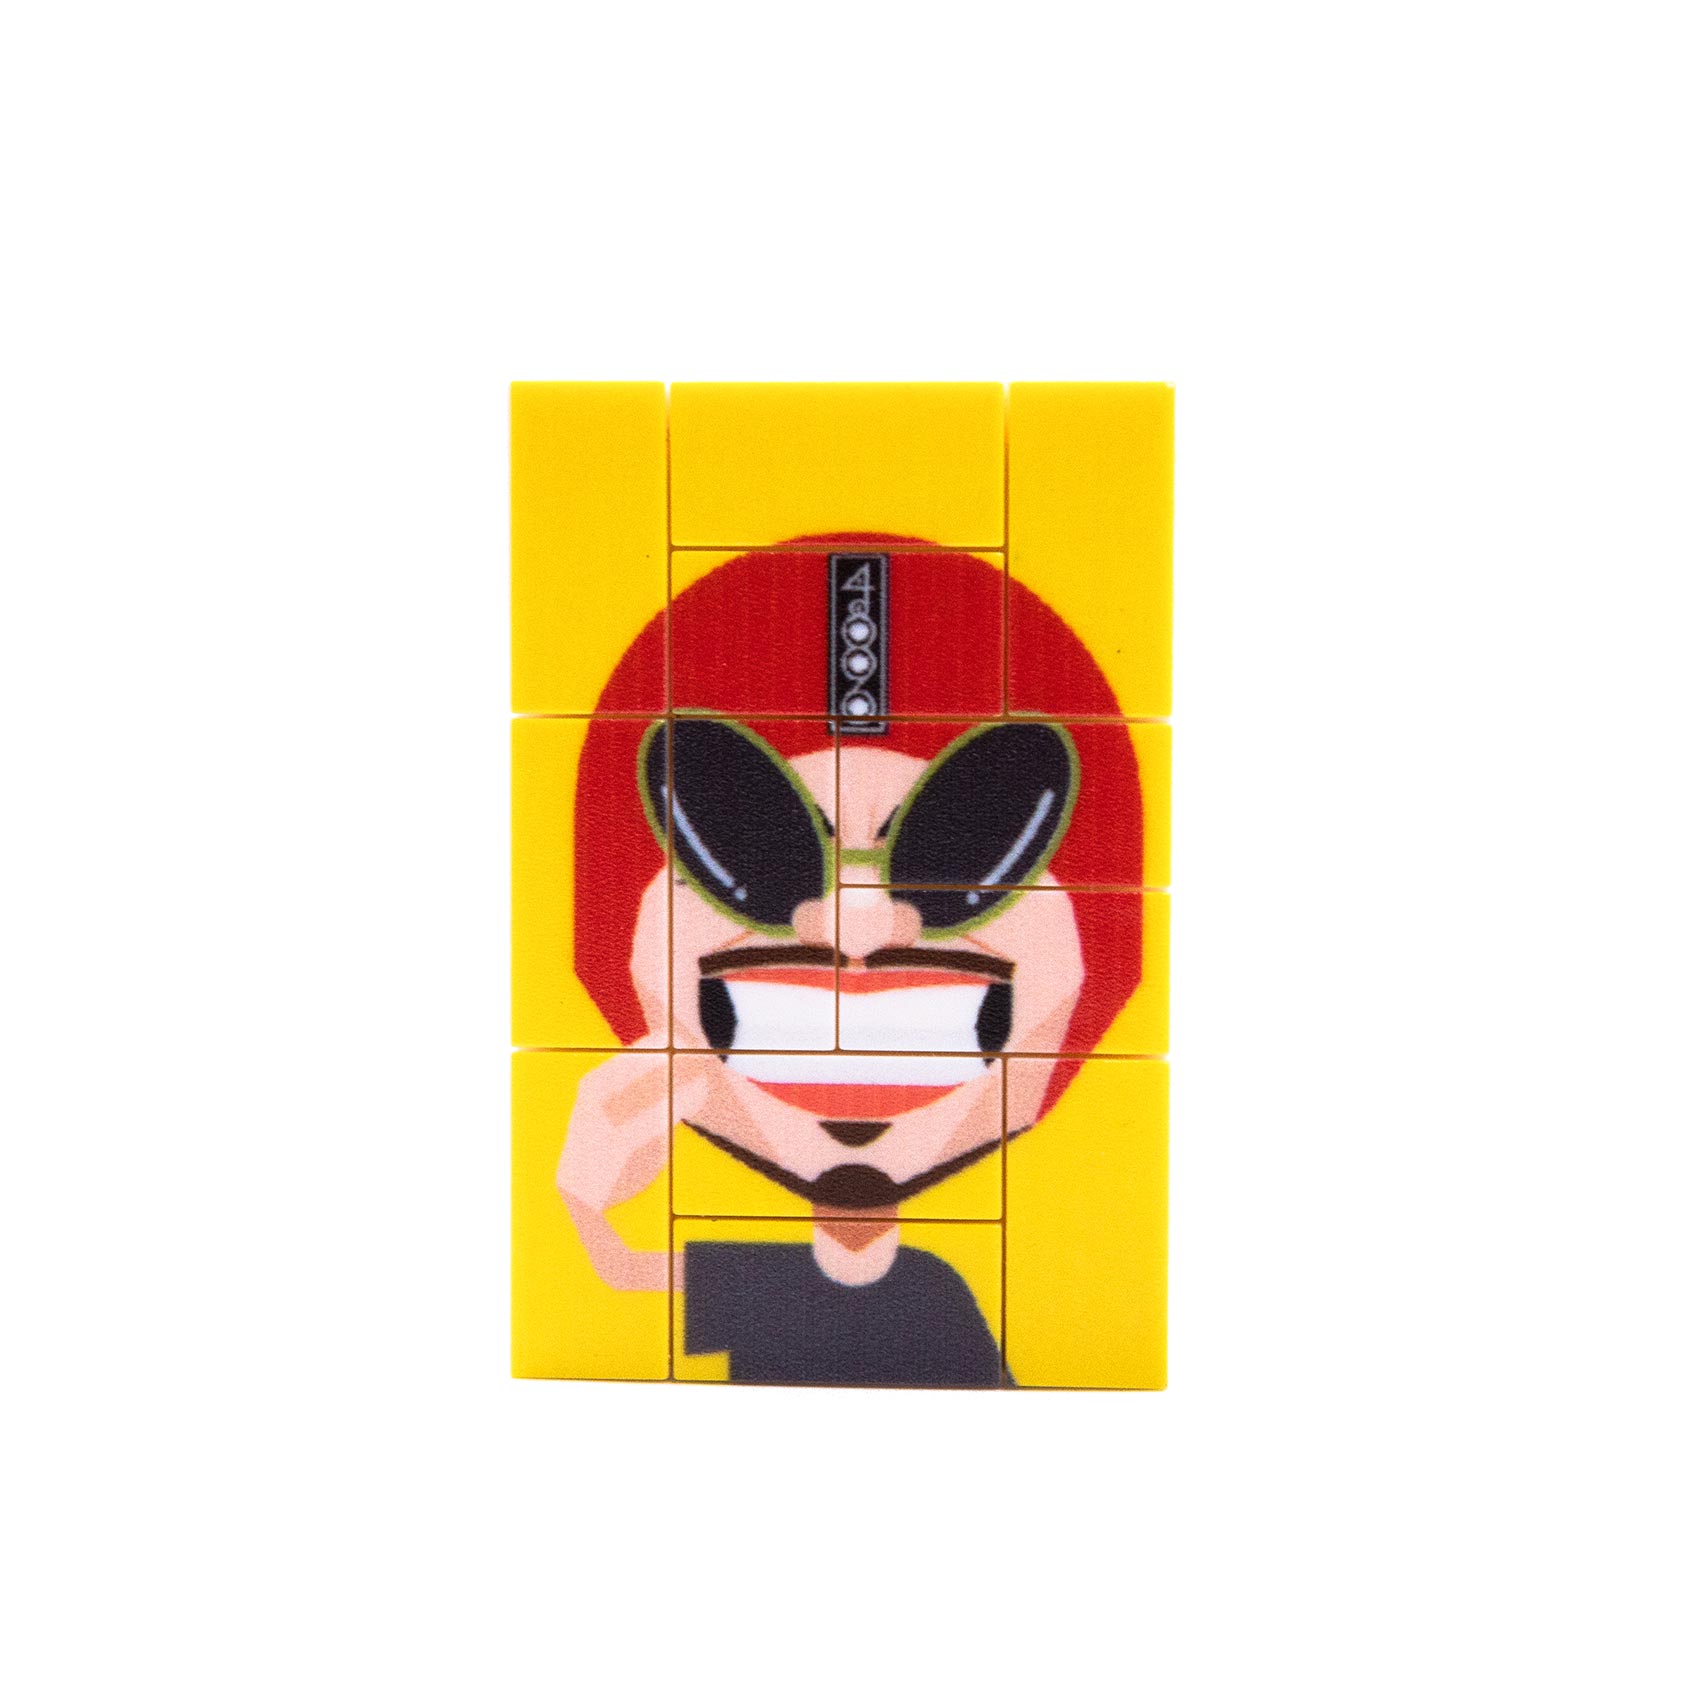 4896 x Namewee Magnet Puzzle (Yellow)